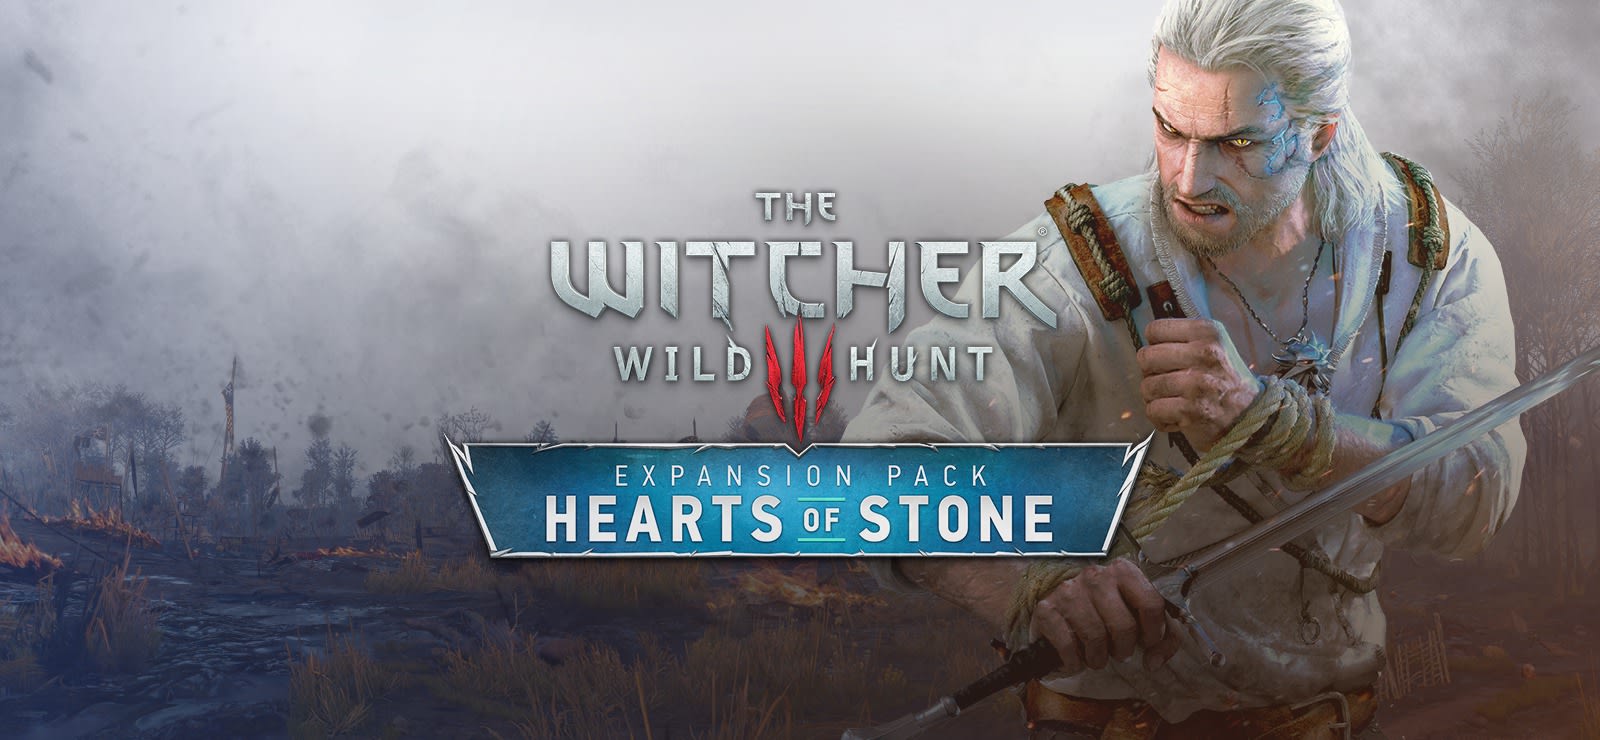 The witcher 3 heart of stone soundtrack фото 3